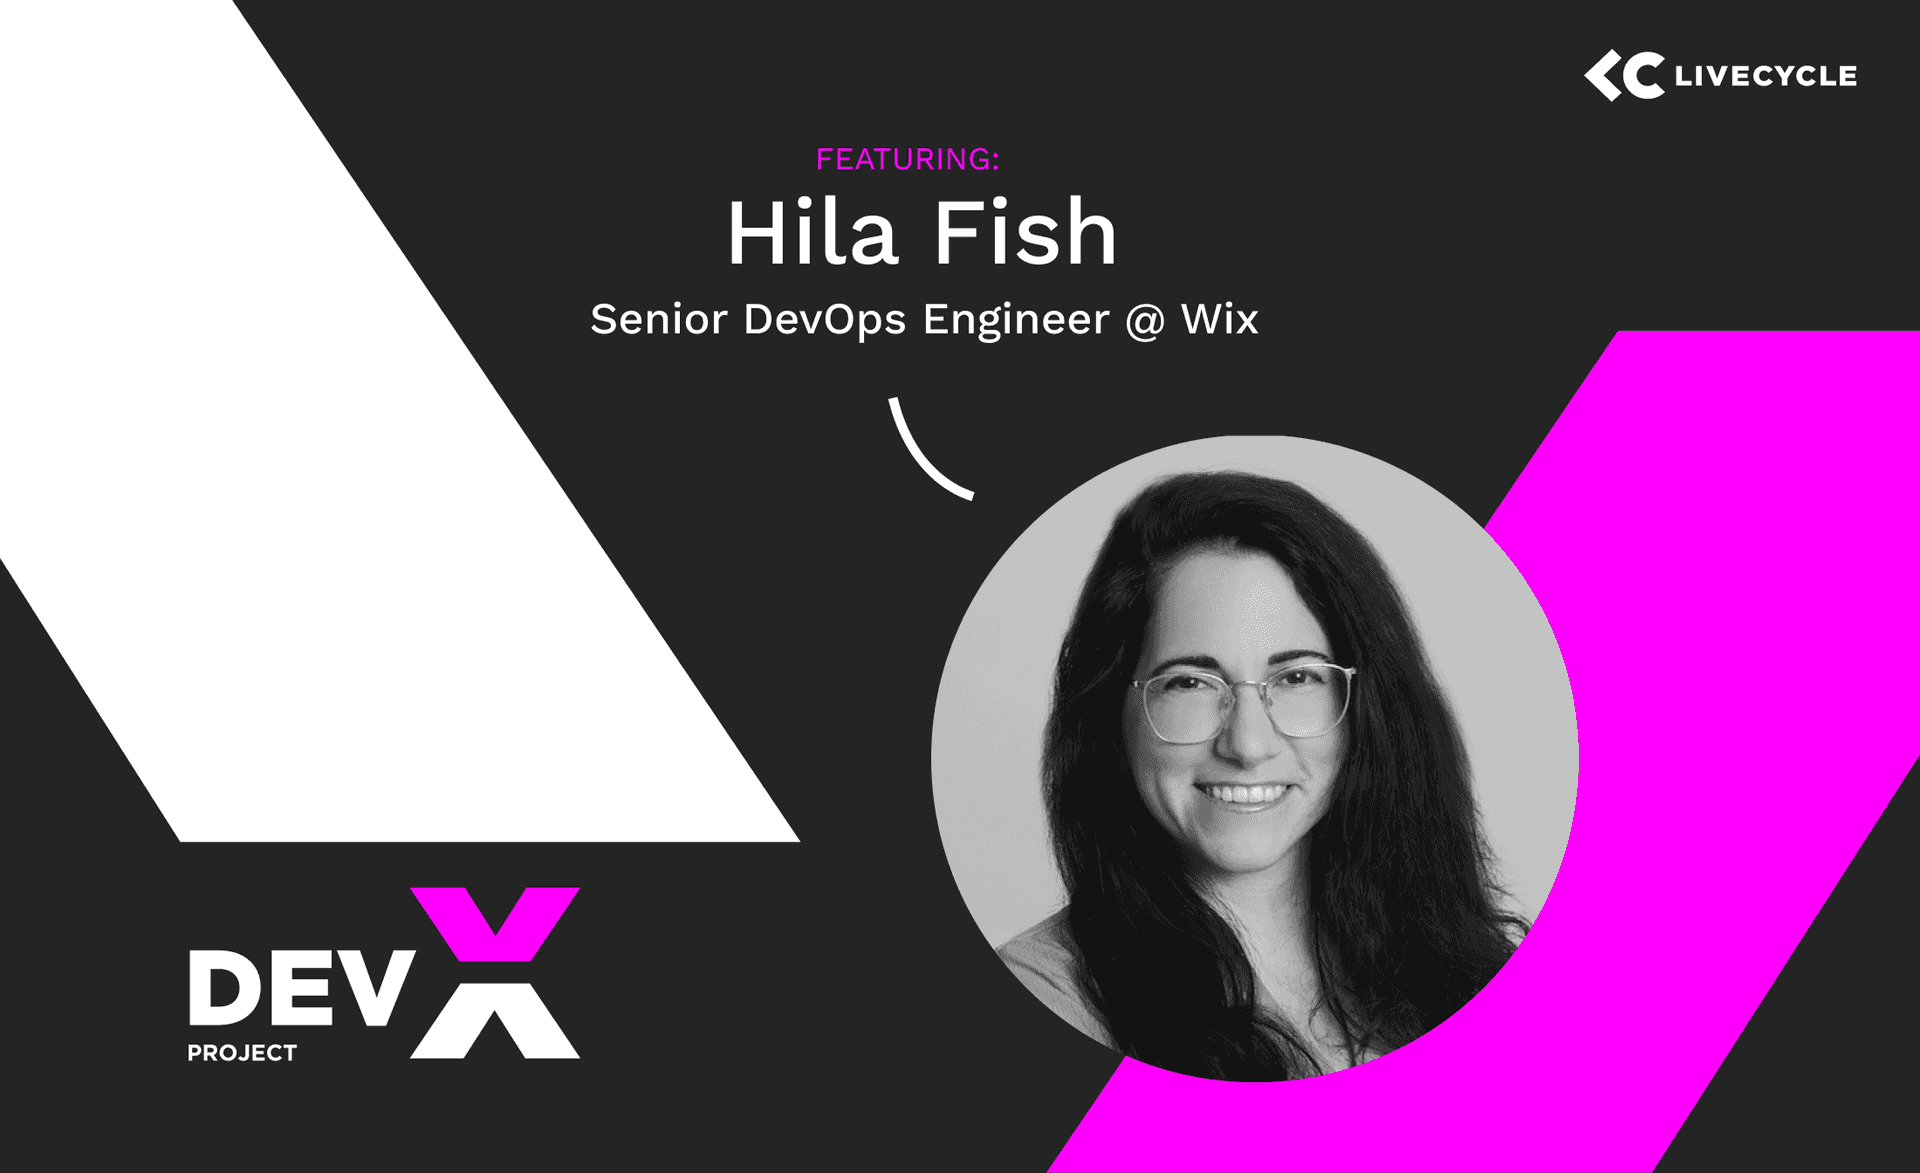 The Dev-X Project: Featuring Hila Fish